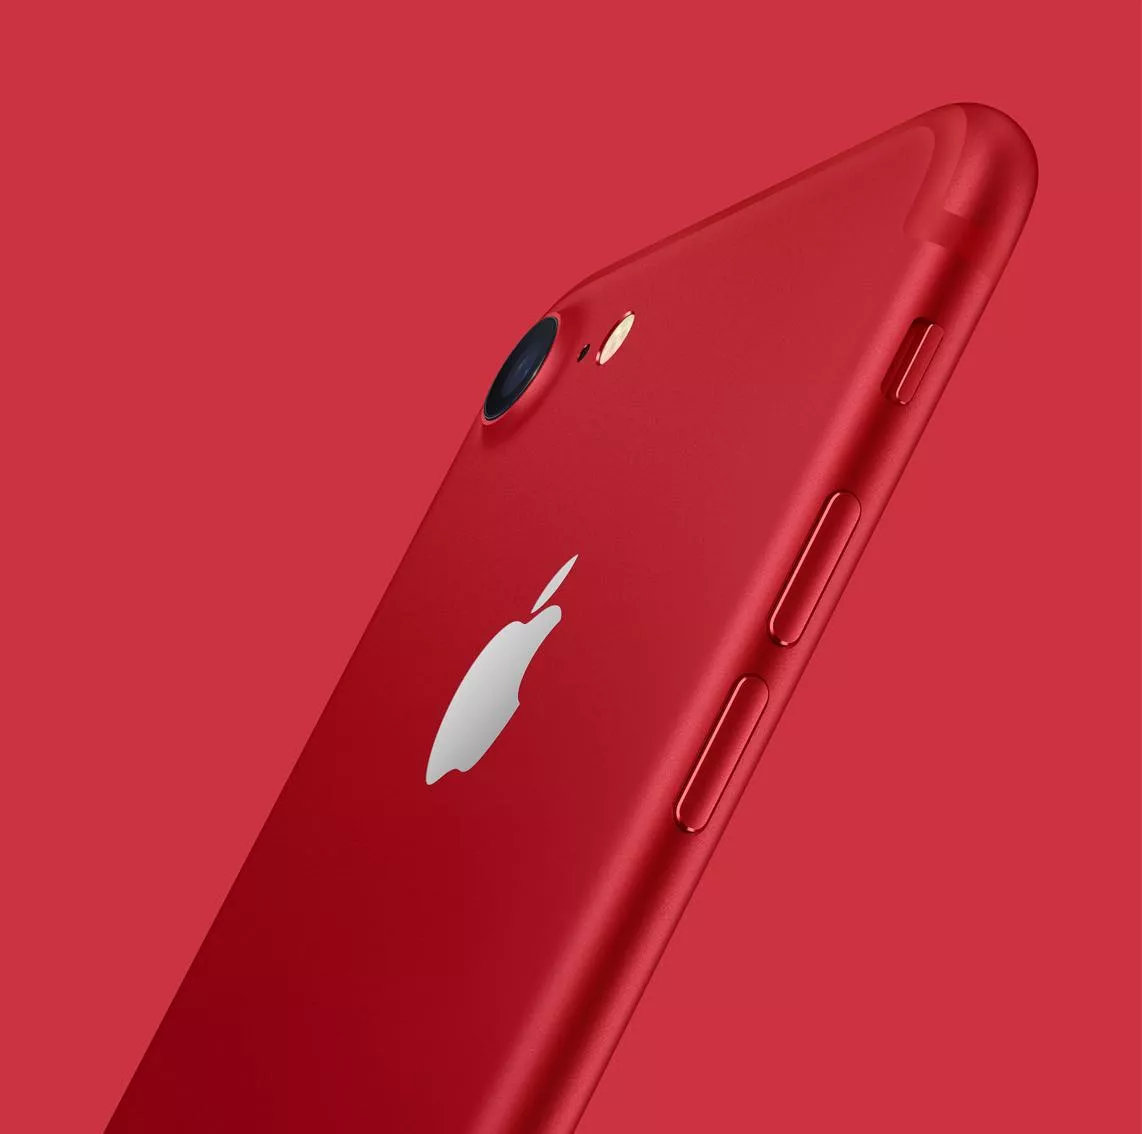 red iphone 7 apple